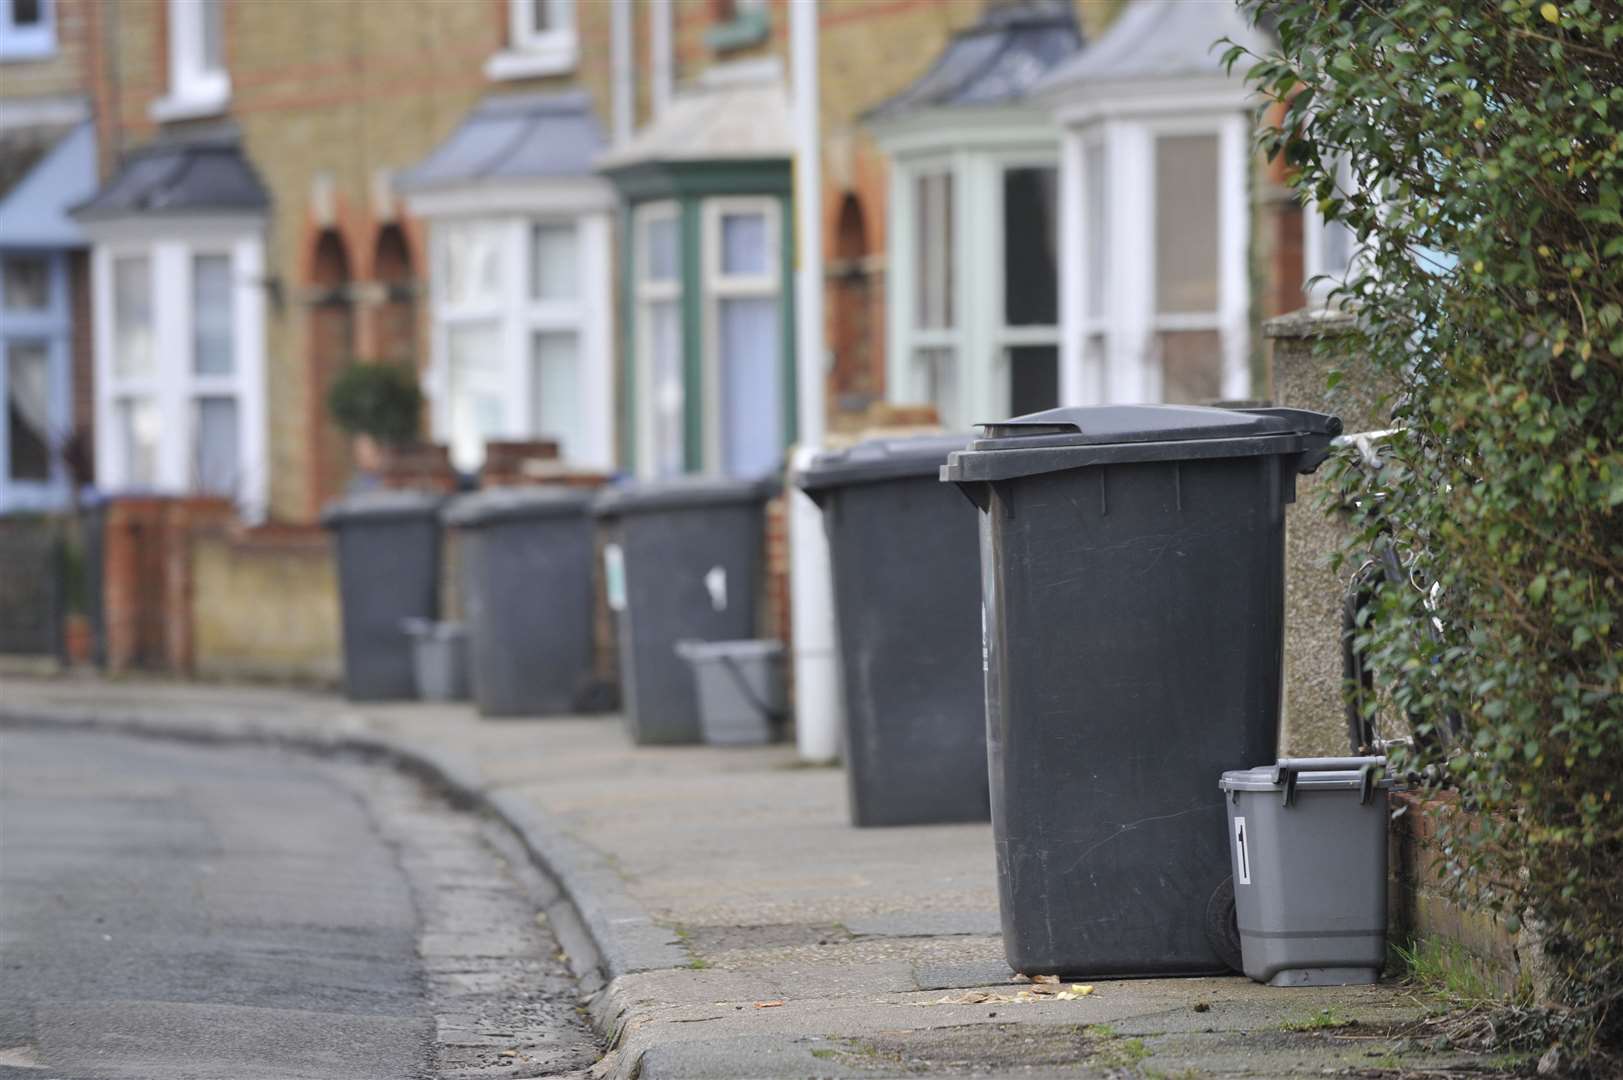 The council hopes to improve bin collection rates